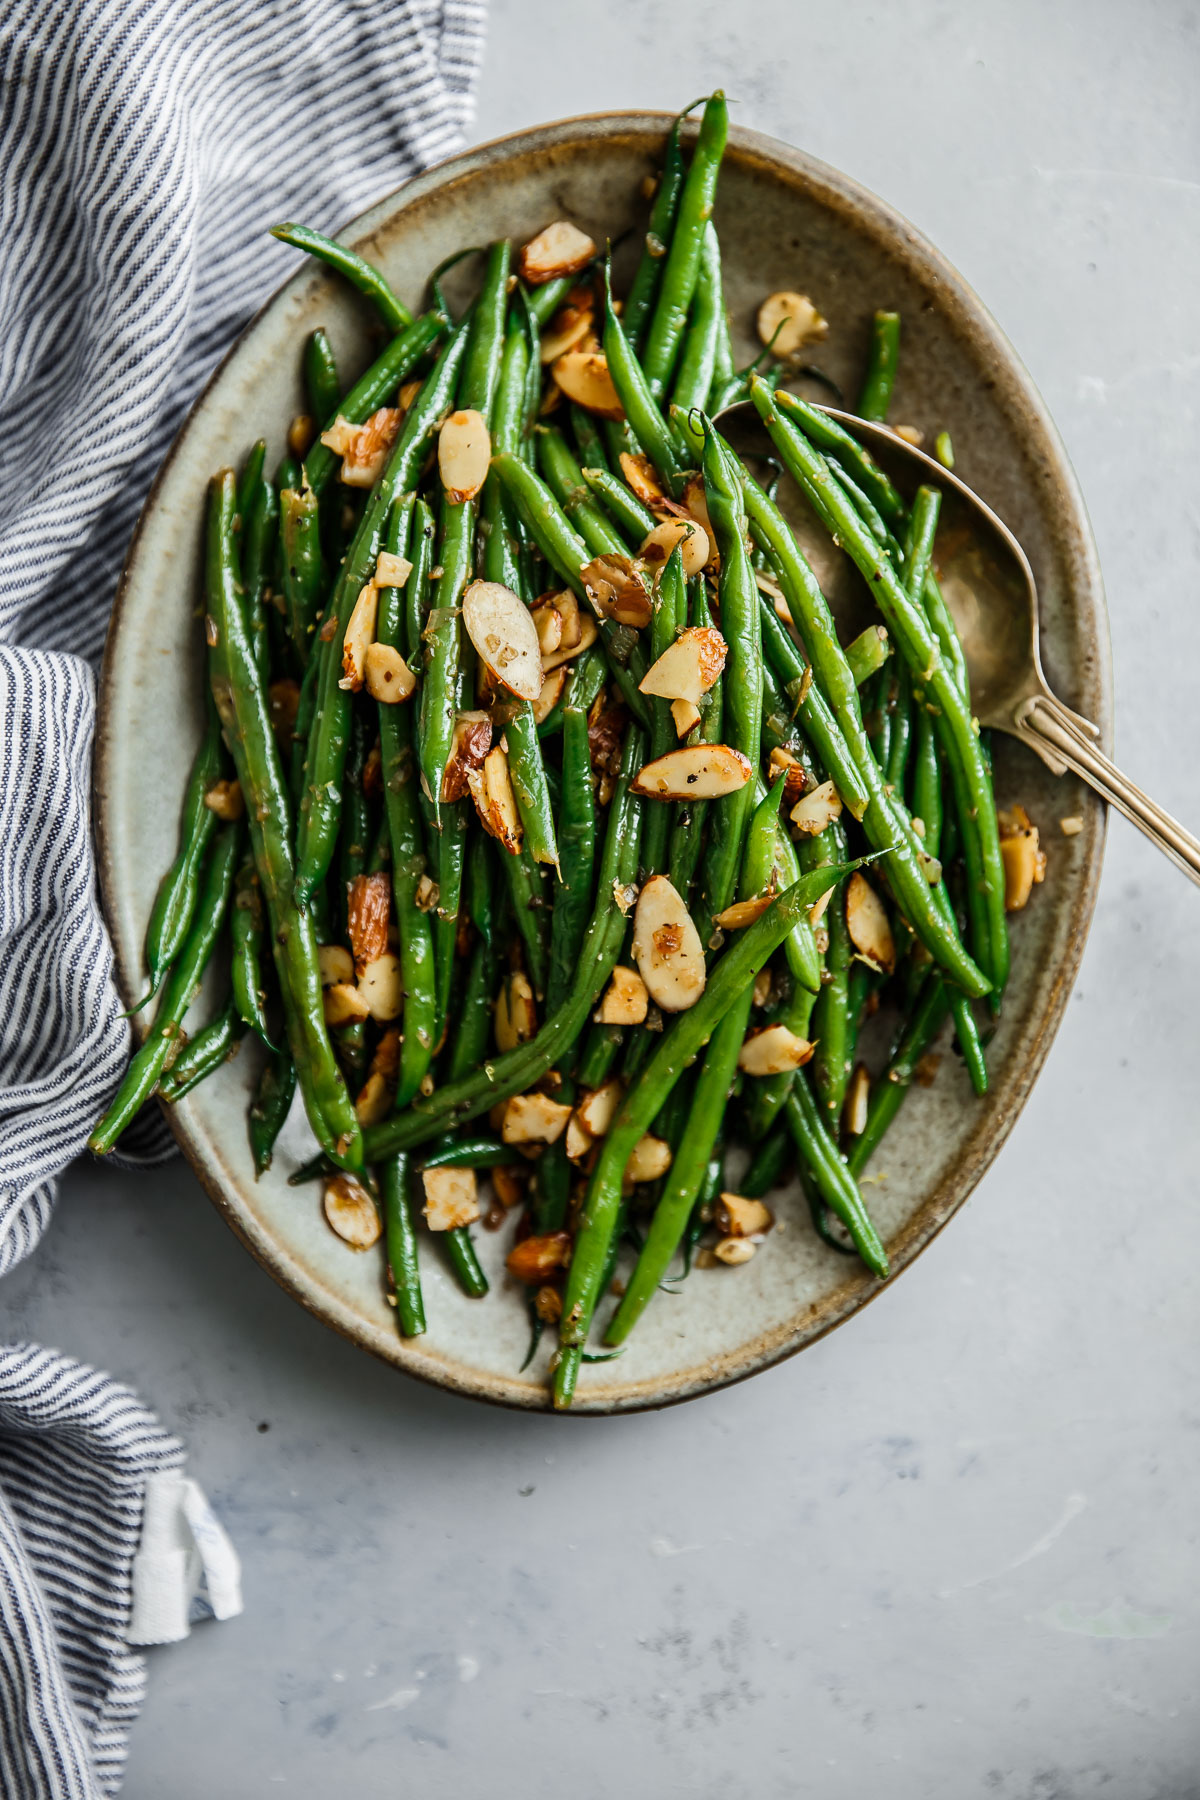 Easy Haricots Verts Recipe (French Green Beans) - VIDEO